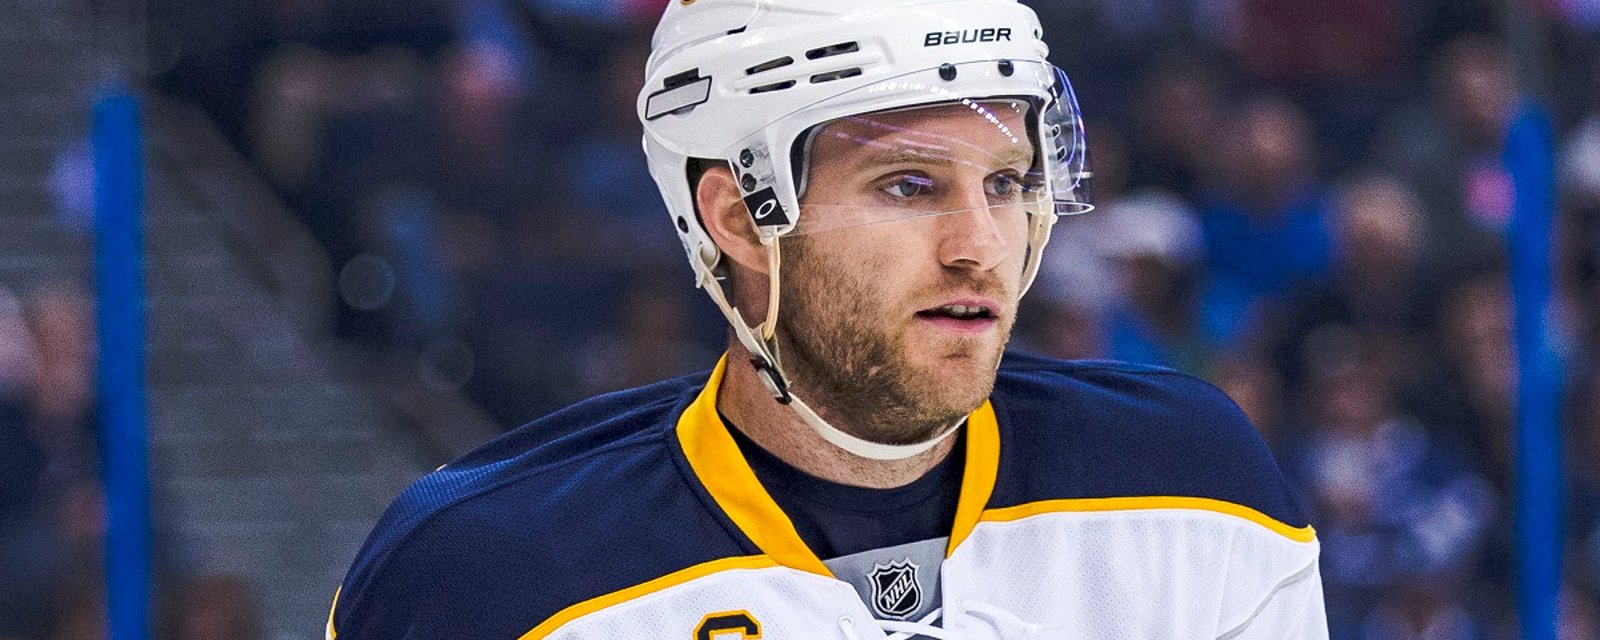 Breaking: Cody Franson has turned down several offers and made a shocking decision!